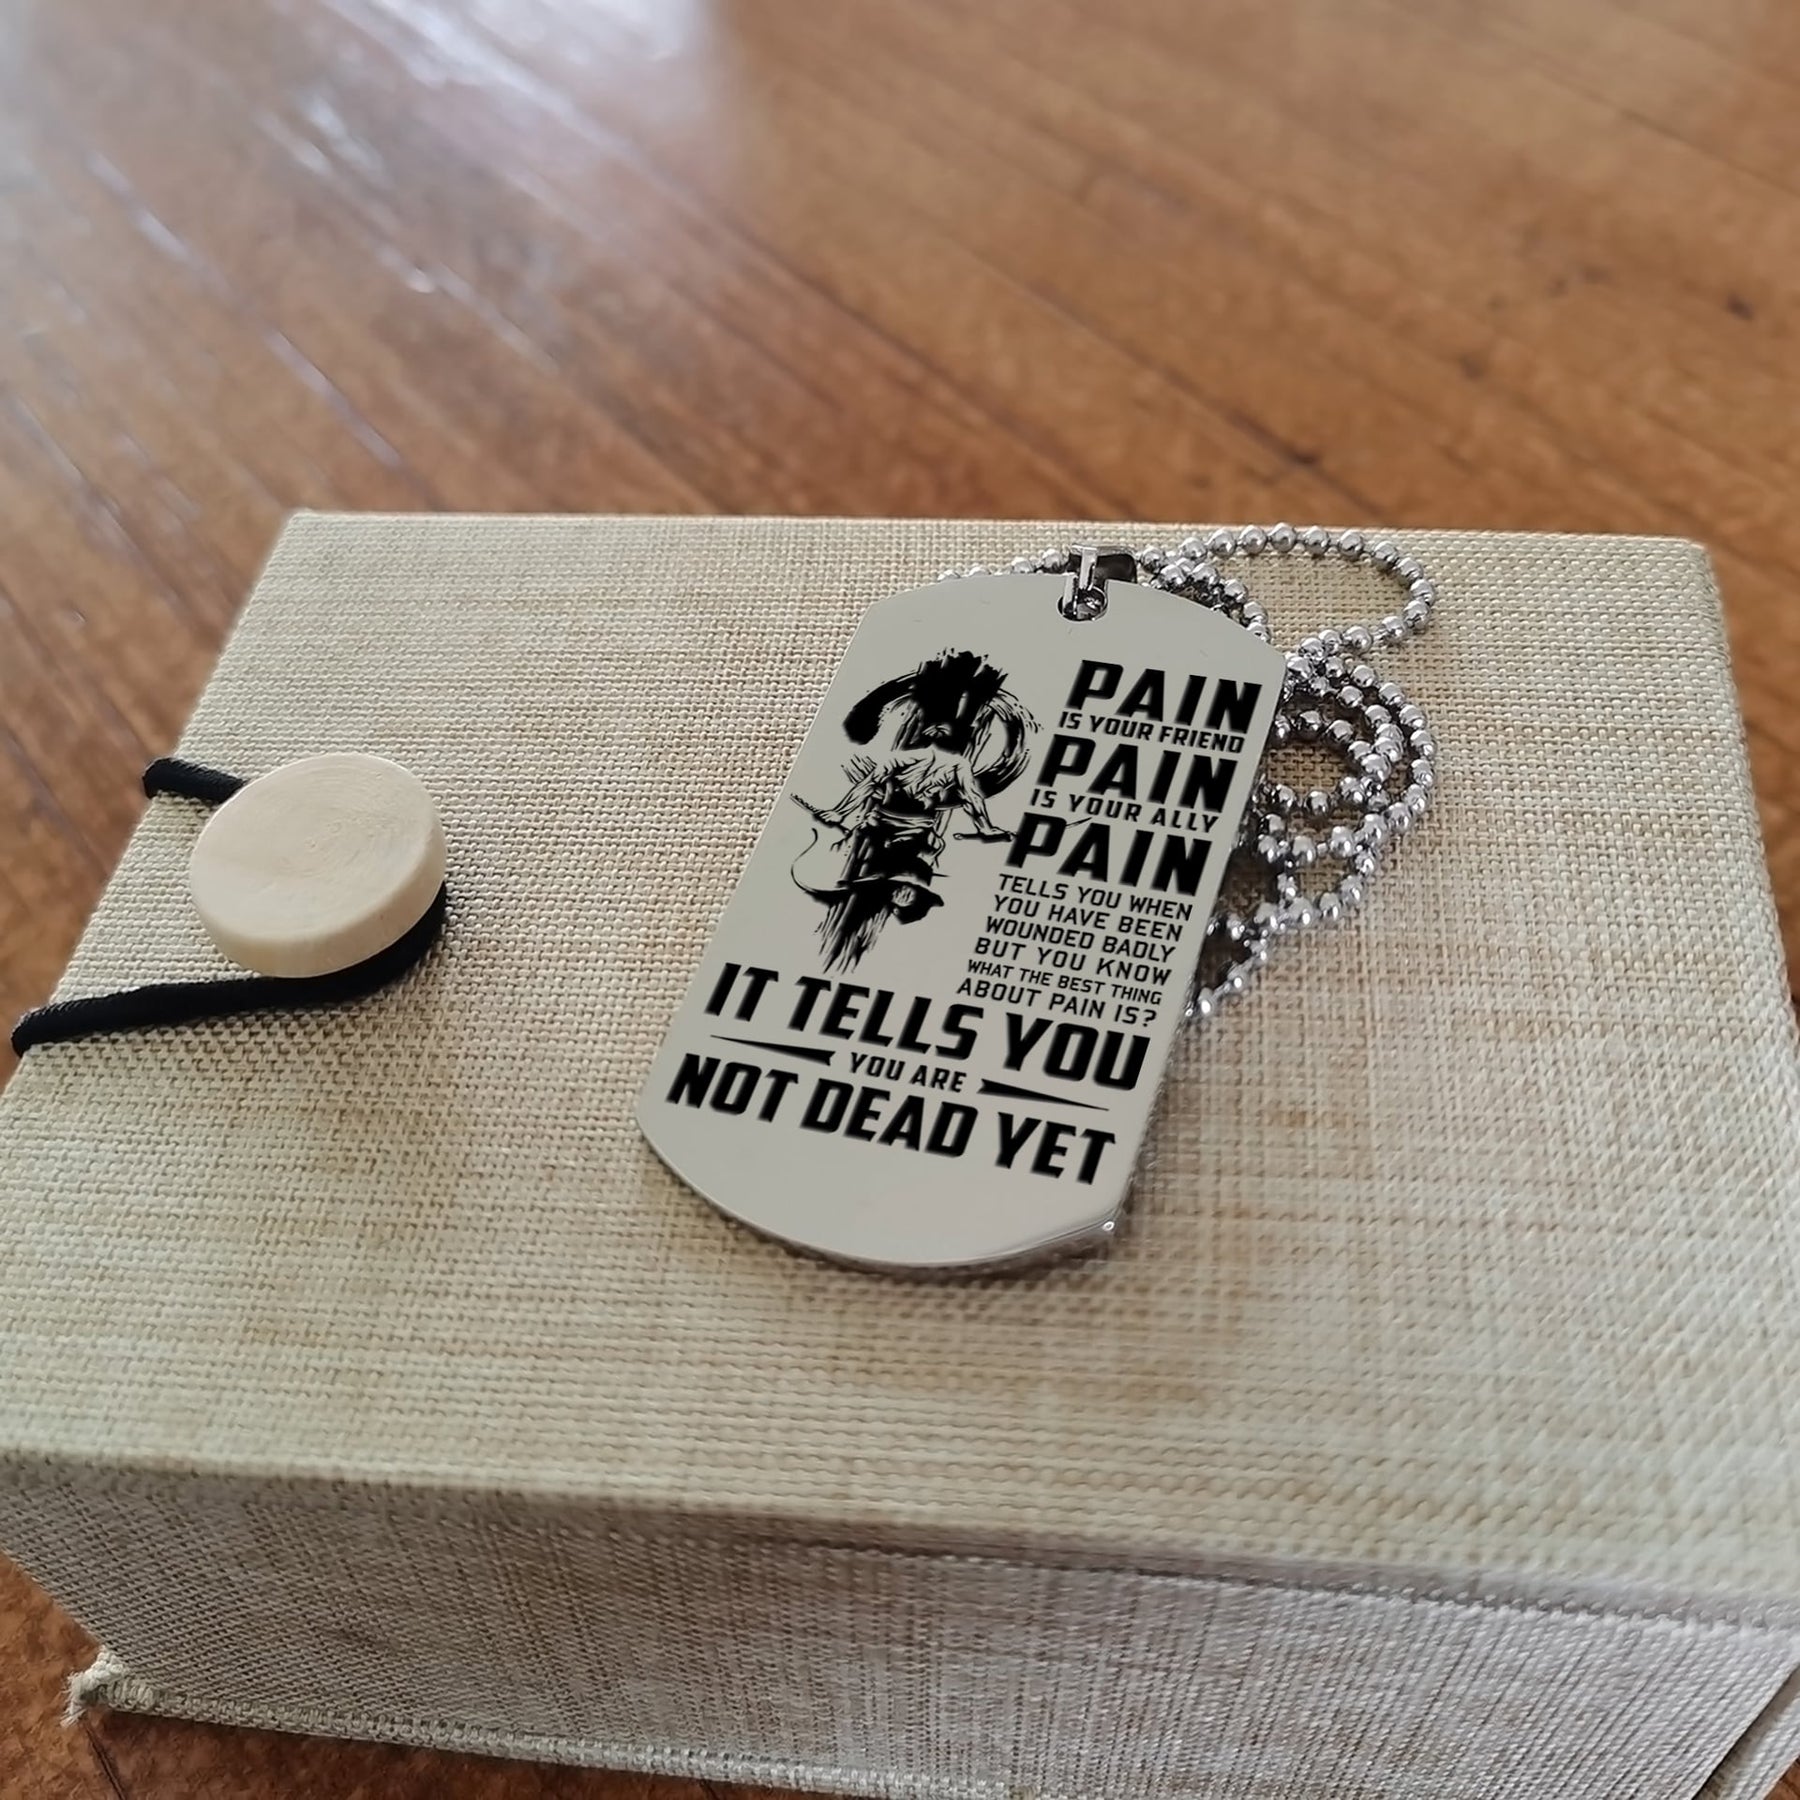 SAD004 - PAIN - You Are Not Dead Yet - Samurai - Engrave Silver Dog Tag